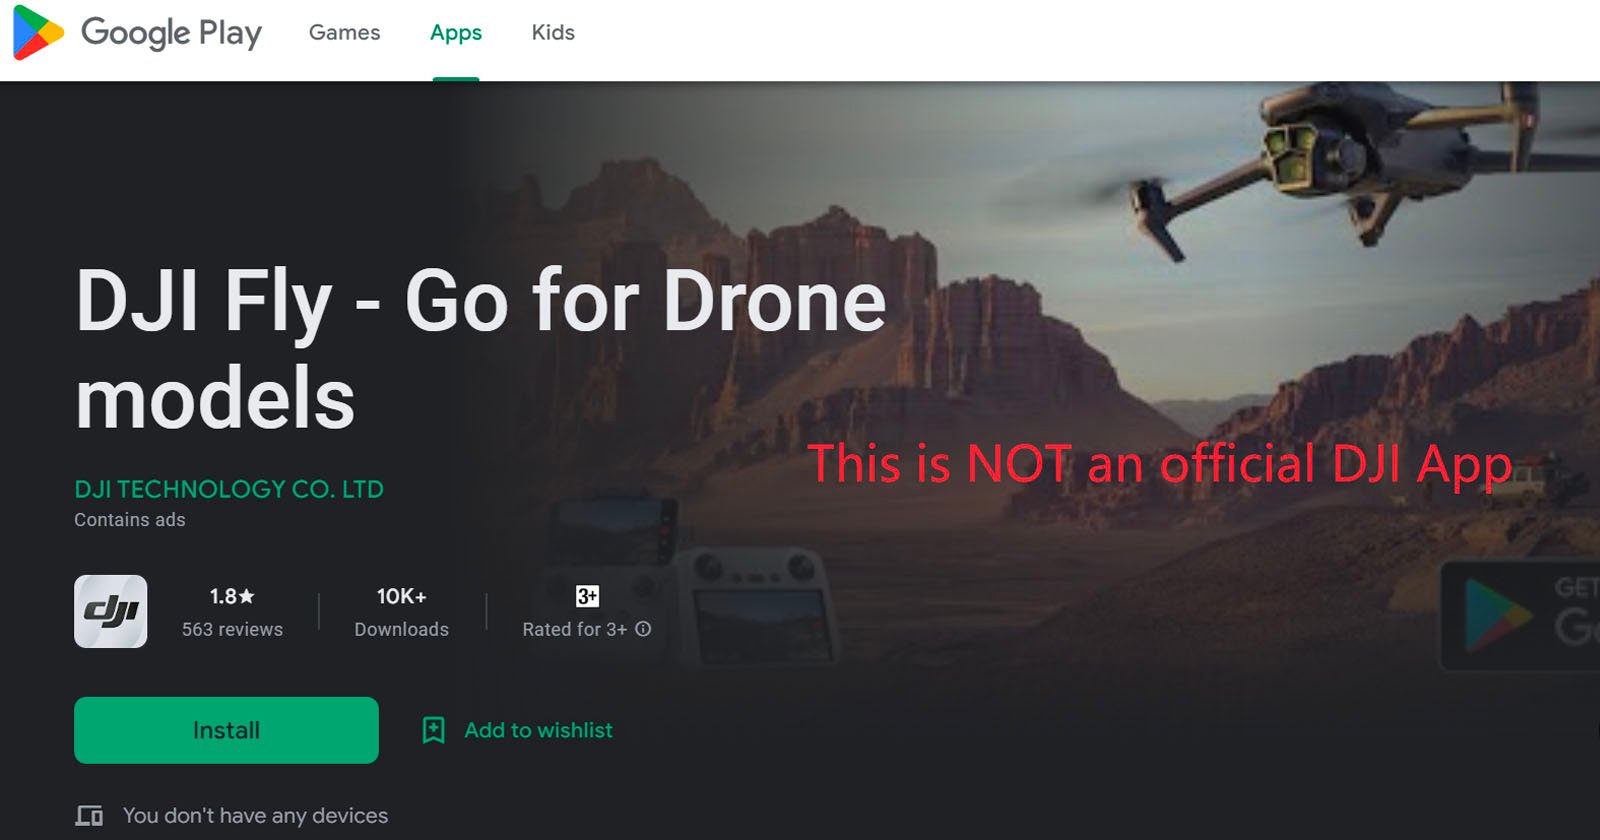  all dji apps google play are frauds 